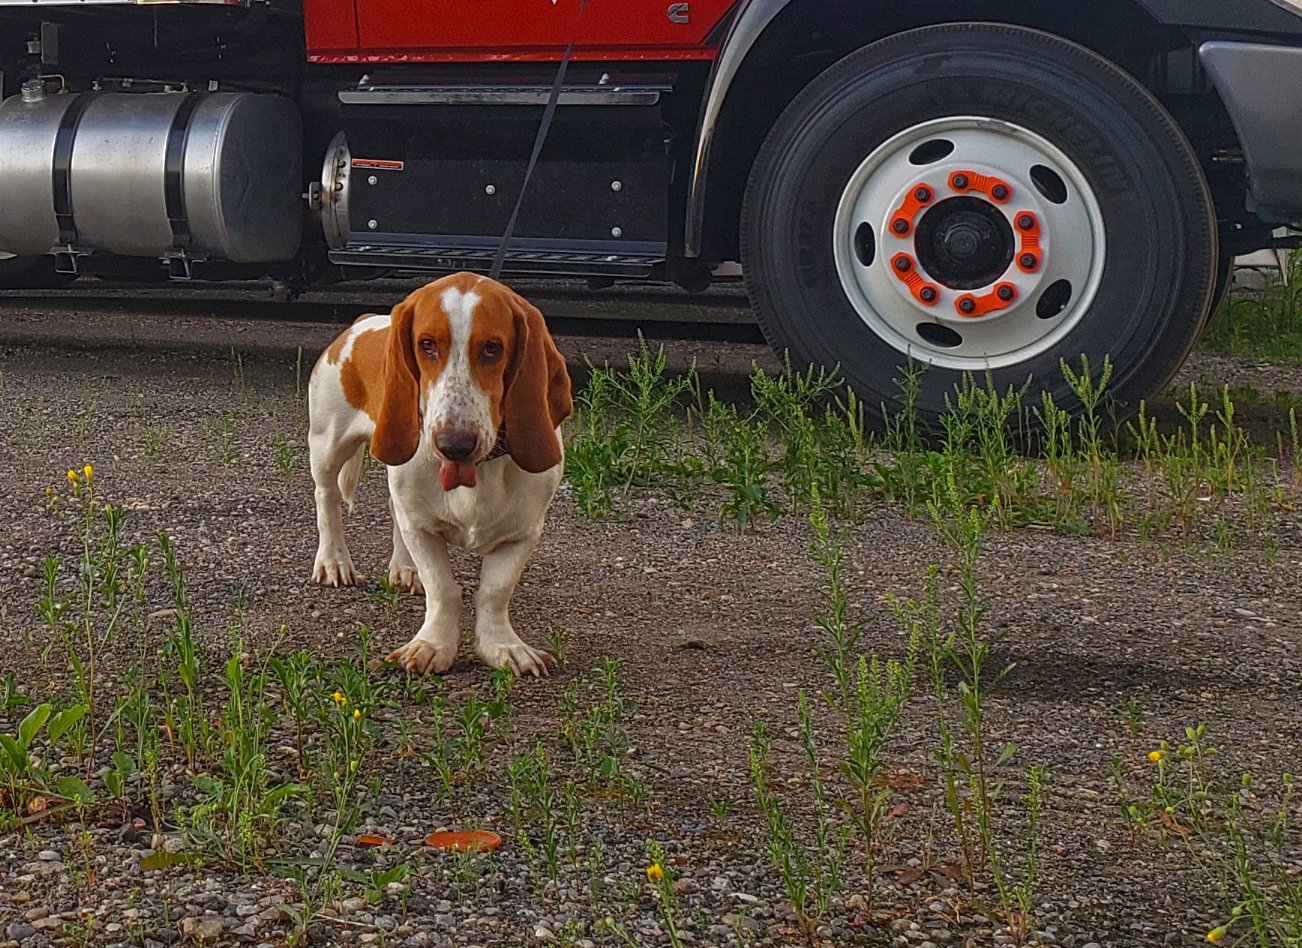 TRUCKING WITH PETS: WHAT YOU NEED TO KNOW